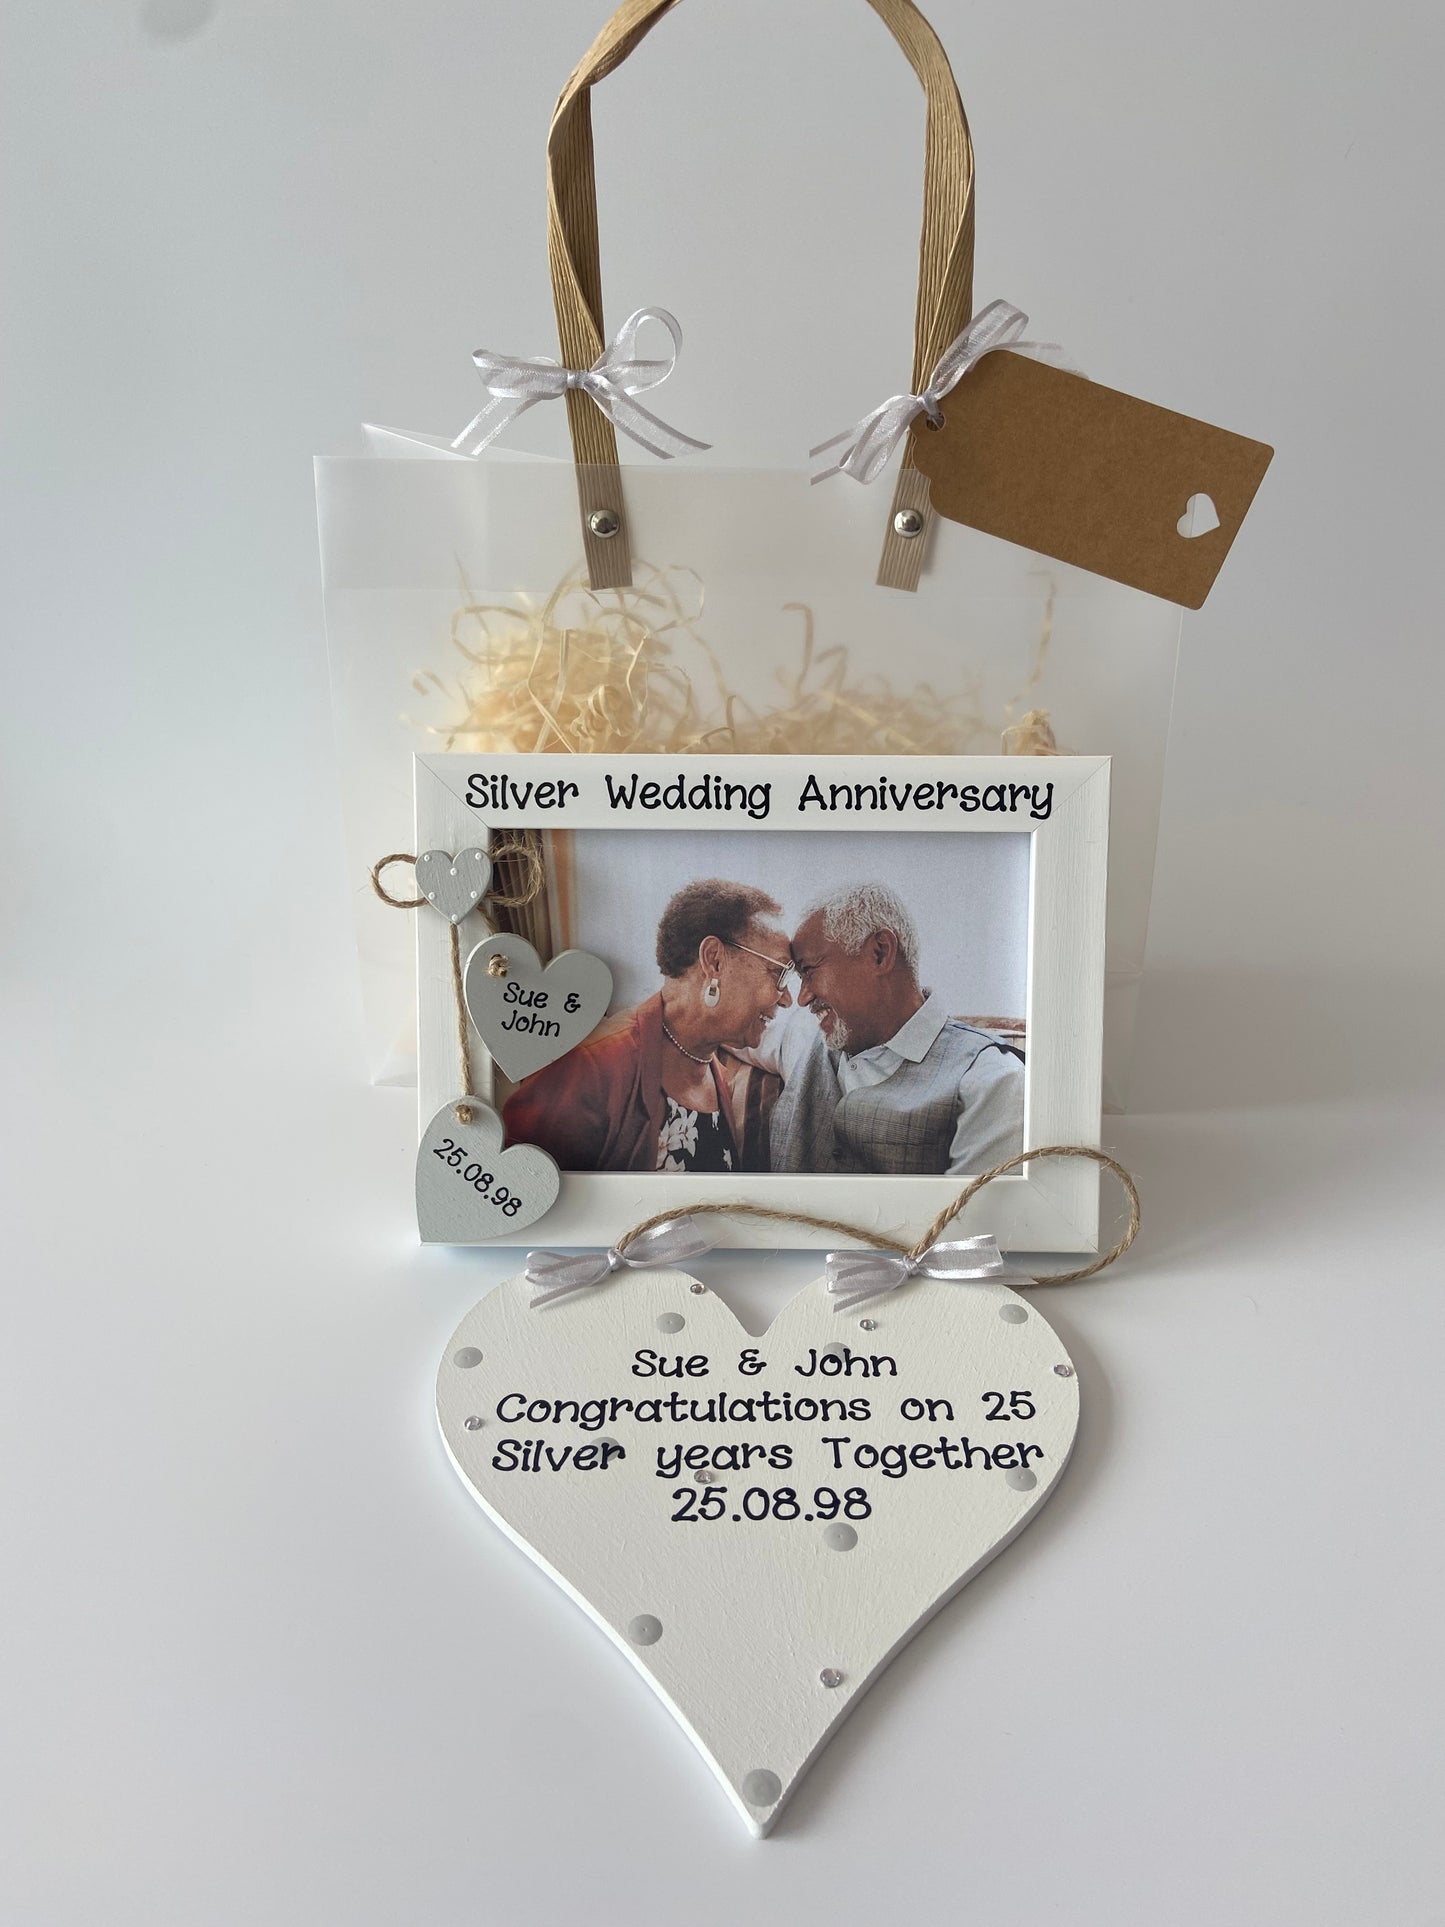 Image shows wedding anniversary gift set including a photo frame and plaque, decorated with polka dots, gems and ribbon. Frame with two hearts with the couples names and wedding date. Includes gift wrap and photo.